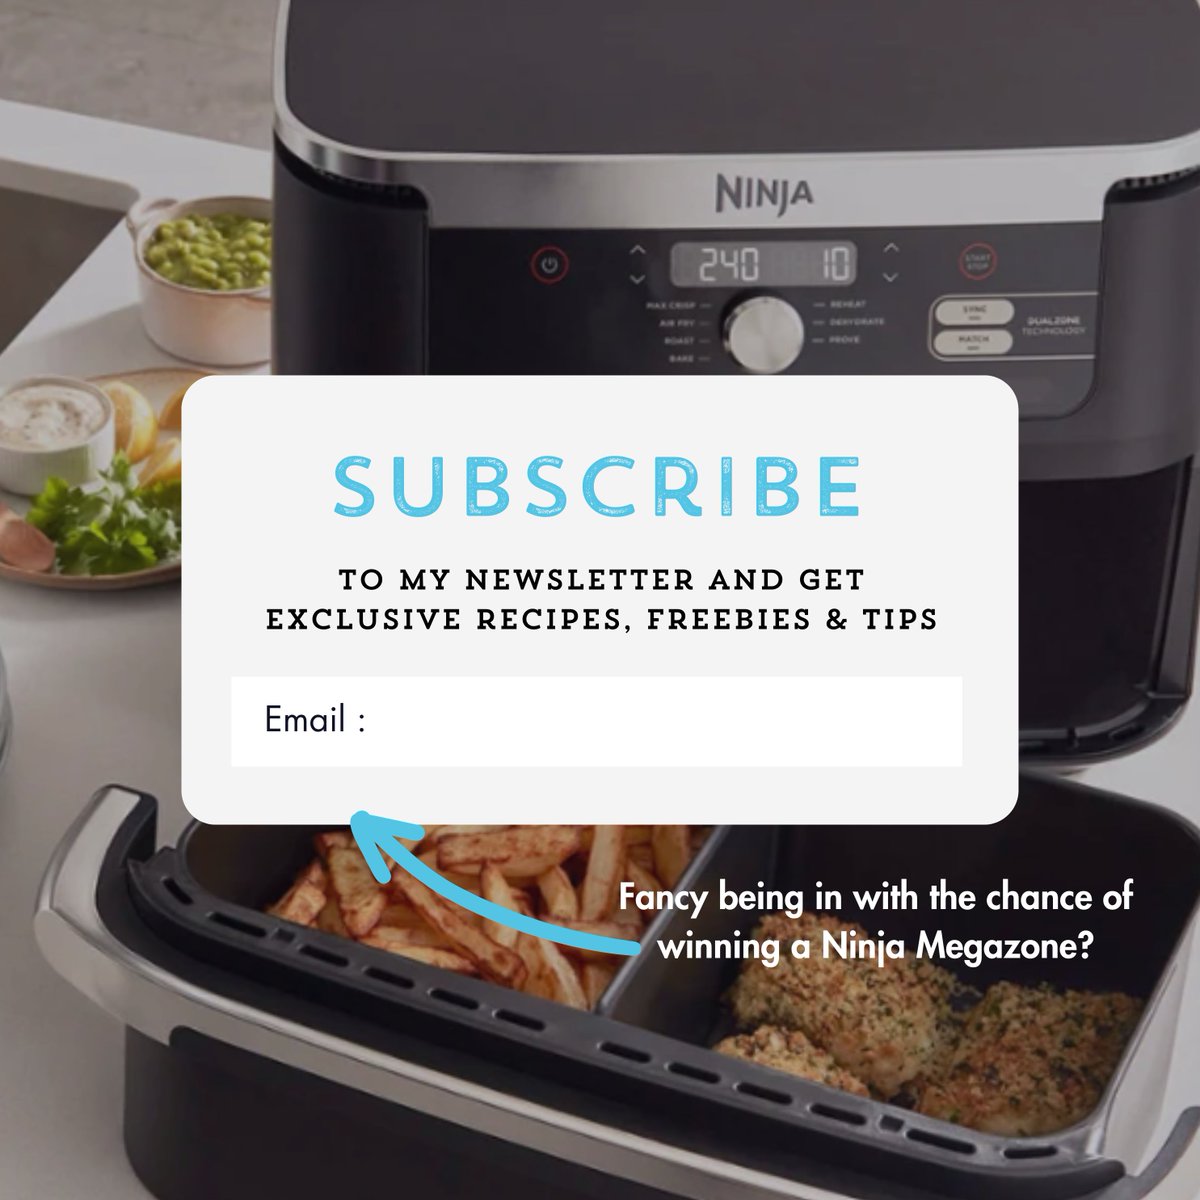 Subscribe to the Bored of Lunch newsletter for a chance to win a @NinjaKitchen Megazone Air Fryer and a signed Air Fryer 30 Minute Meals Cookbook🎉 I'll be selecting one lucky subscriber on 9th May, sign up today👇 boredoflunch.com/newsletter/